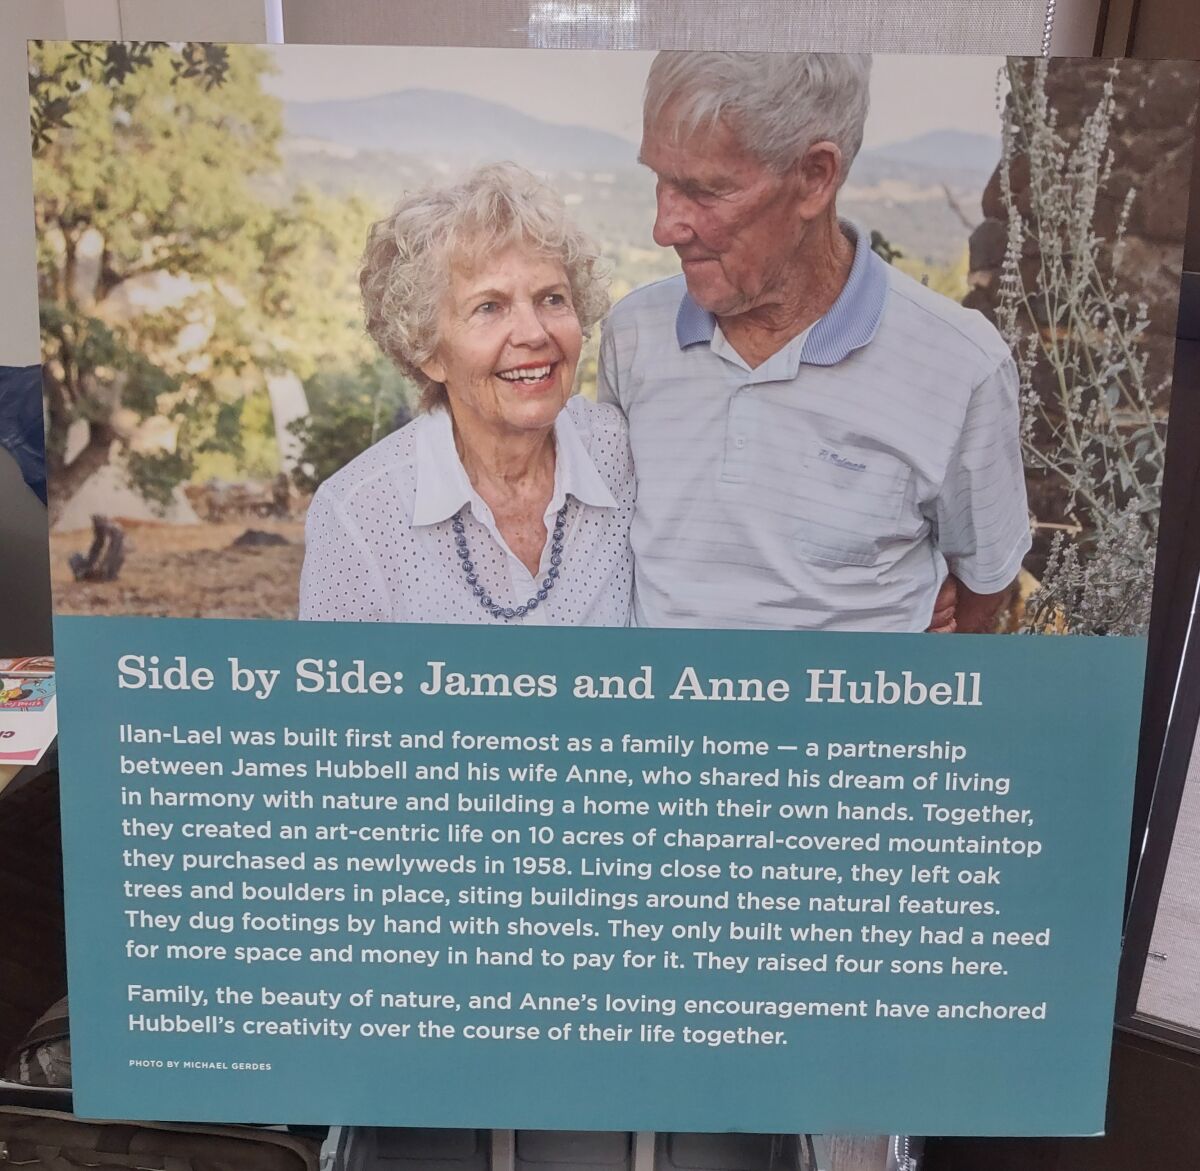 “Seeking Beauty: Jim's Gift” tells the story of artist James Hubbell, who is shown on this poster with his wife, Anne.